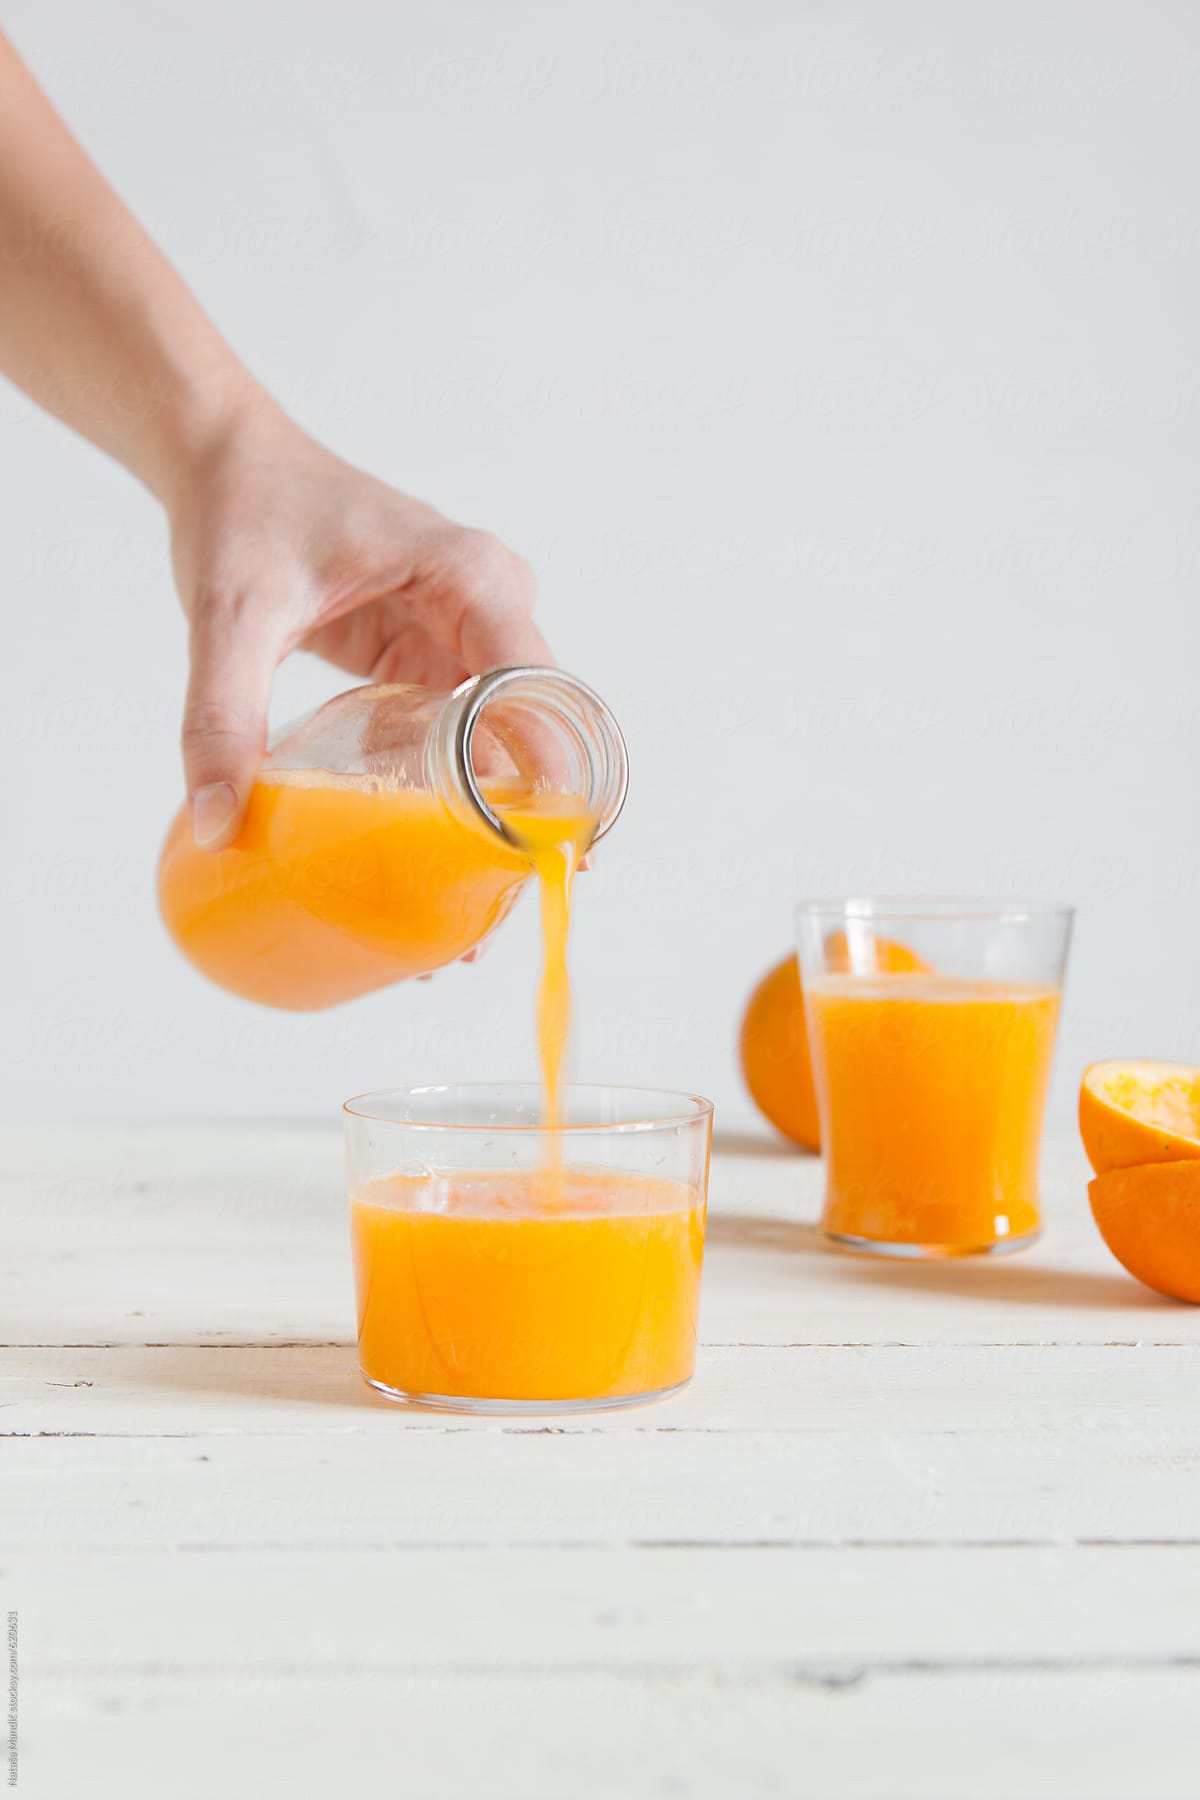 Pouring fresh orange juice in a glass